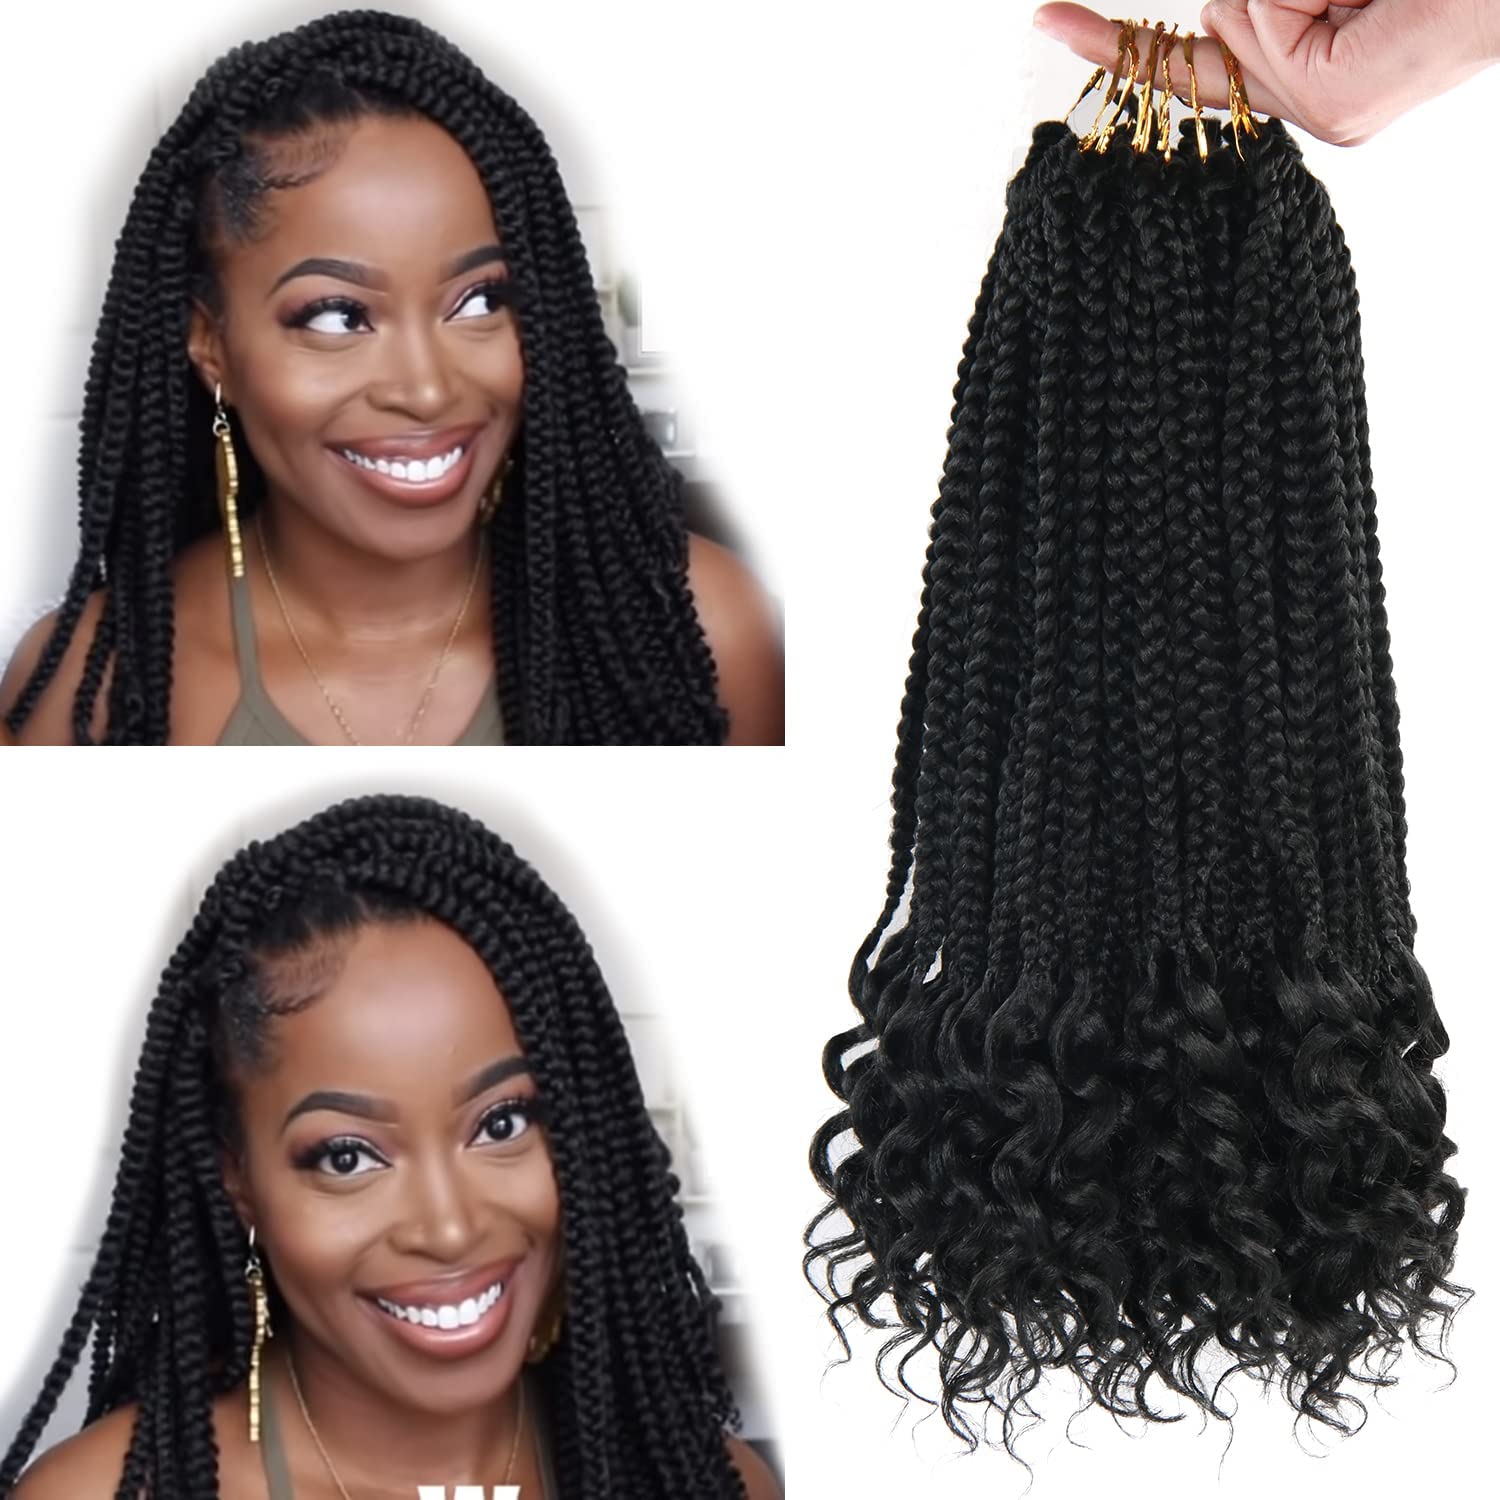 Goddess Box Braids Crochet Hair With Curly Ends 14 Inch – Pure